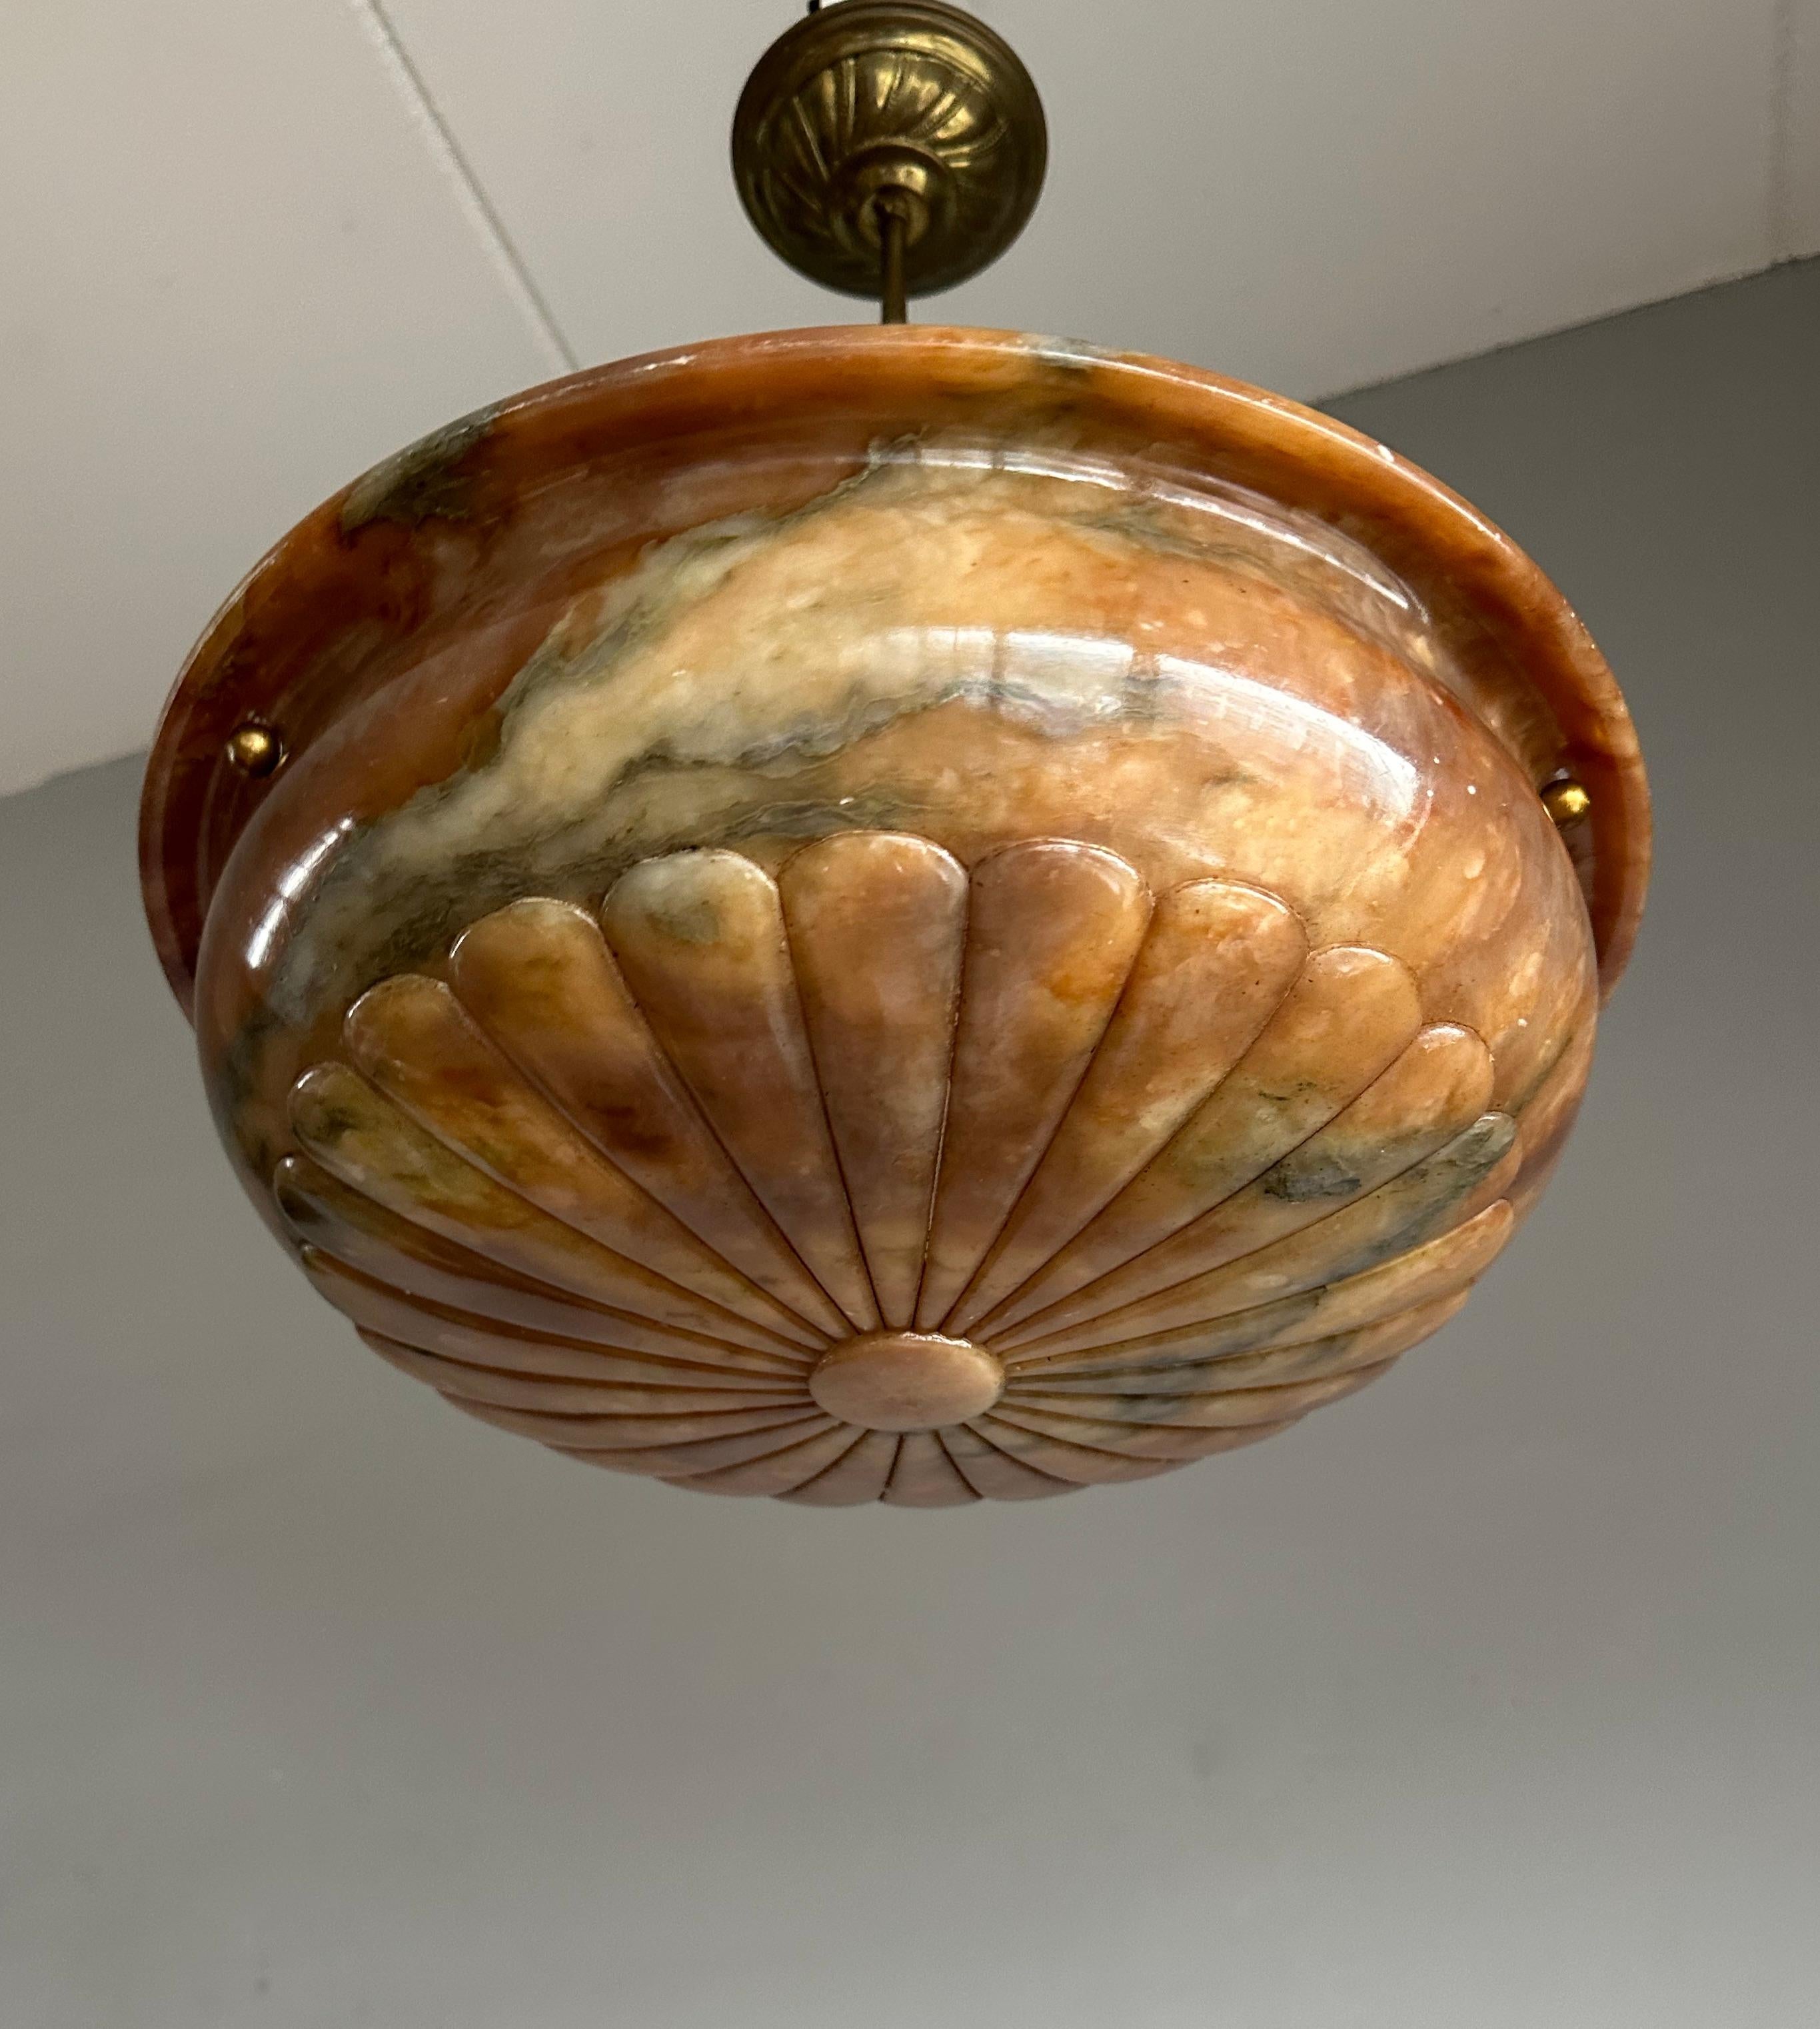 Perfectly Design Antique Alabaster Chandelier / Pendant Light in Mint Condition For Sale 8